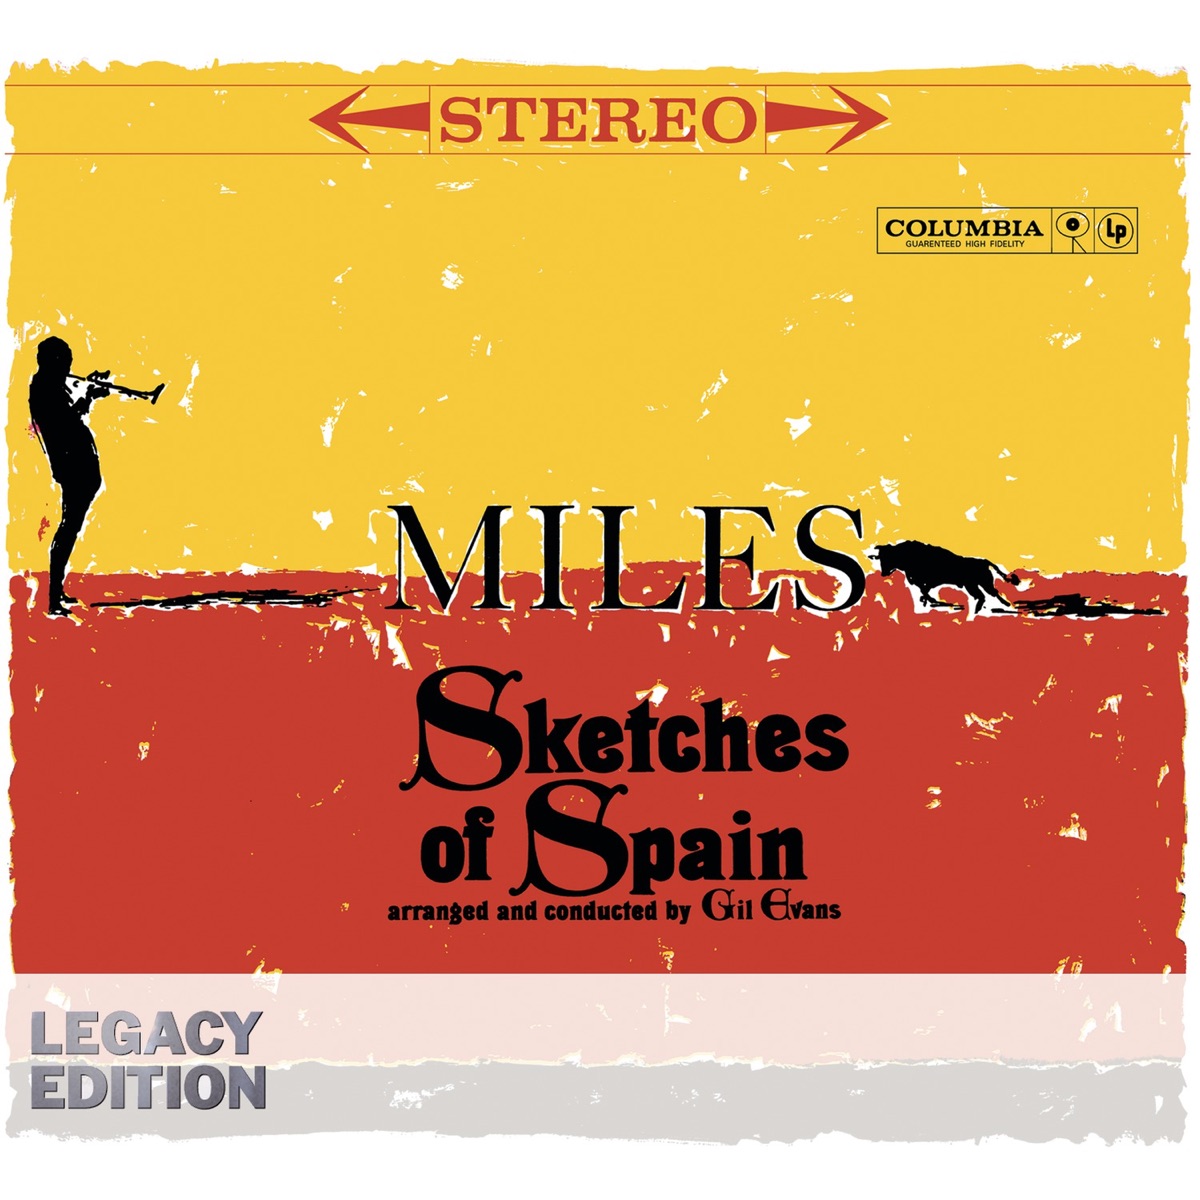 Sketches of Spain by Miles Davis on Apple Music